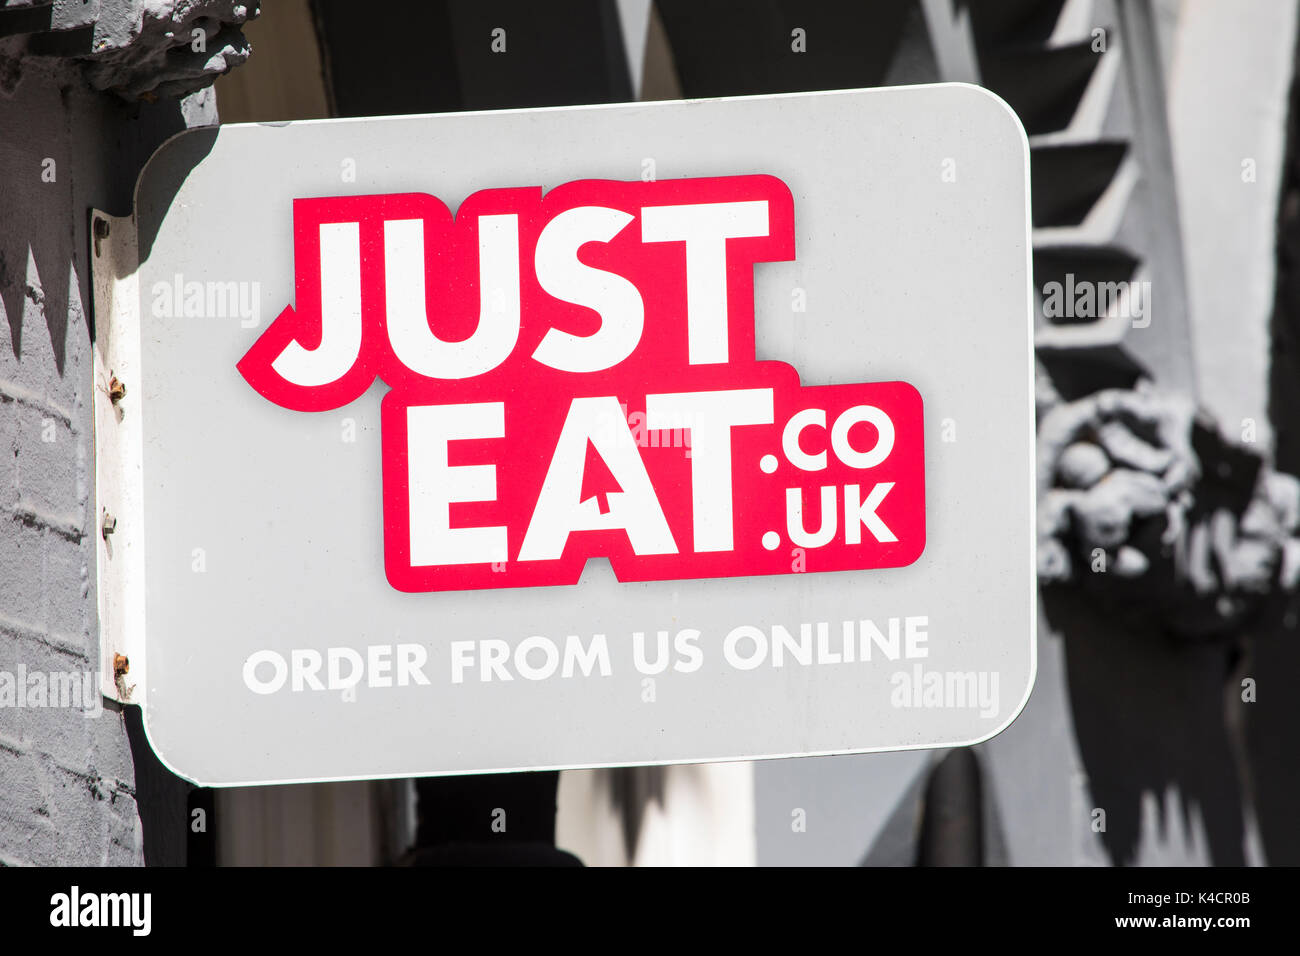 WEYMOUTH, UK - AUGUST 15TH 2017: A Just Eat sign outside a takeaway restaurant in the seaside town of Weymouth in Dorset, on 15th August 2017. Stock Photo